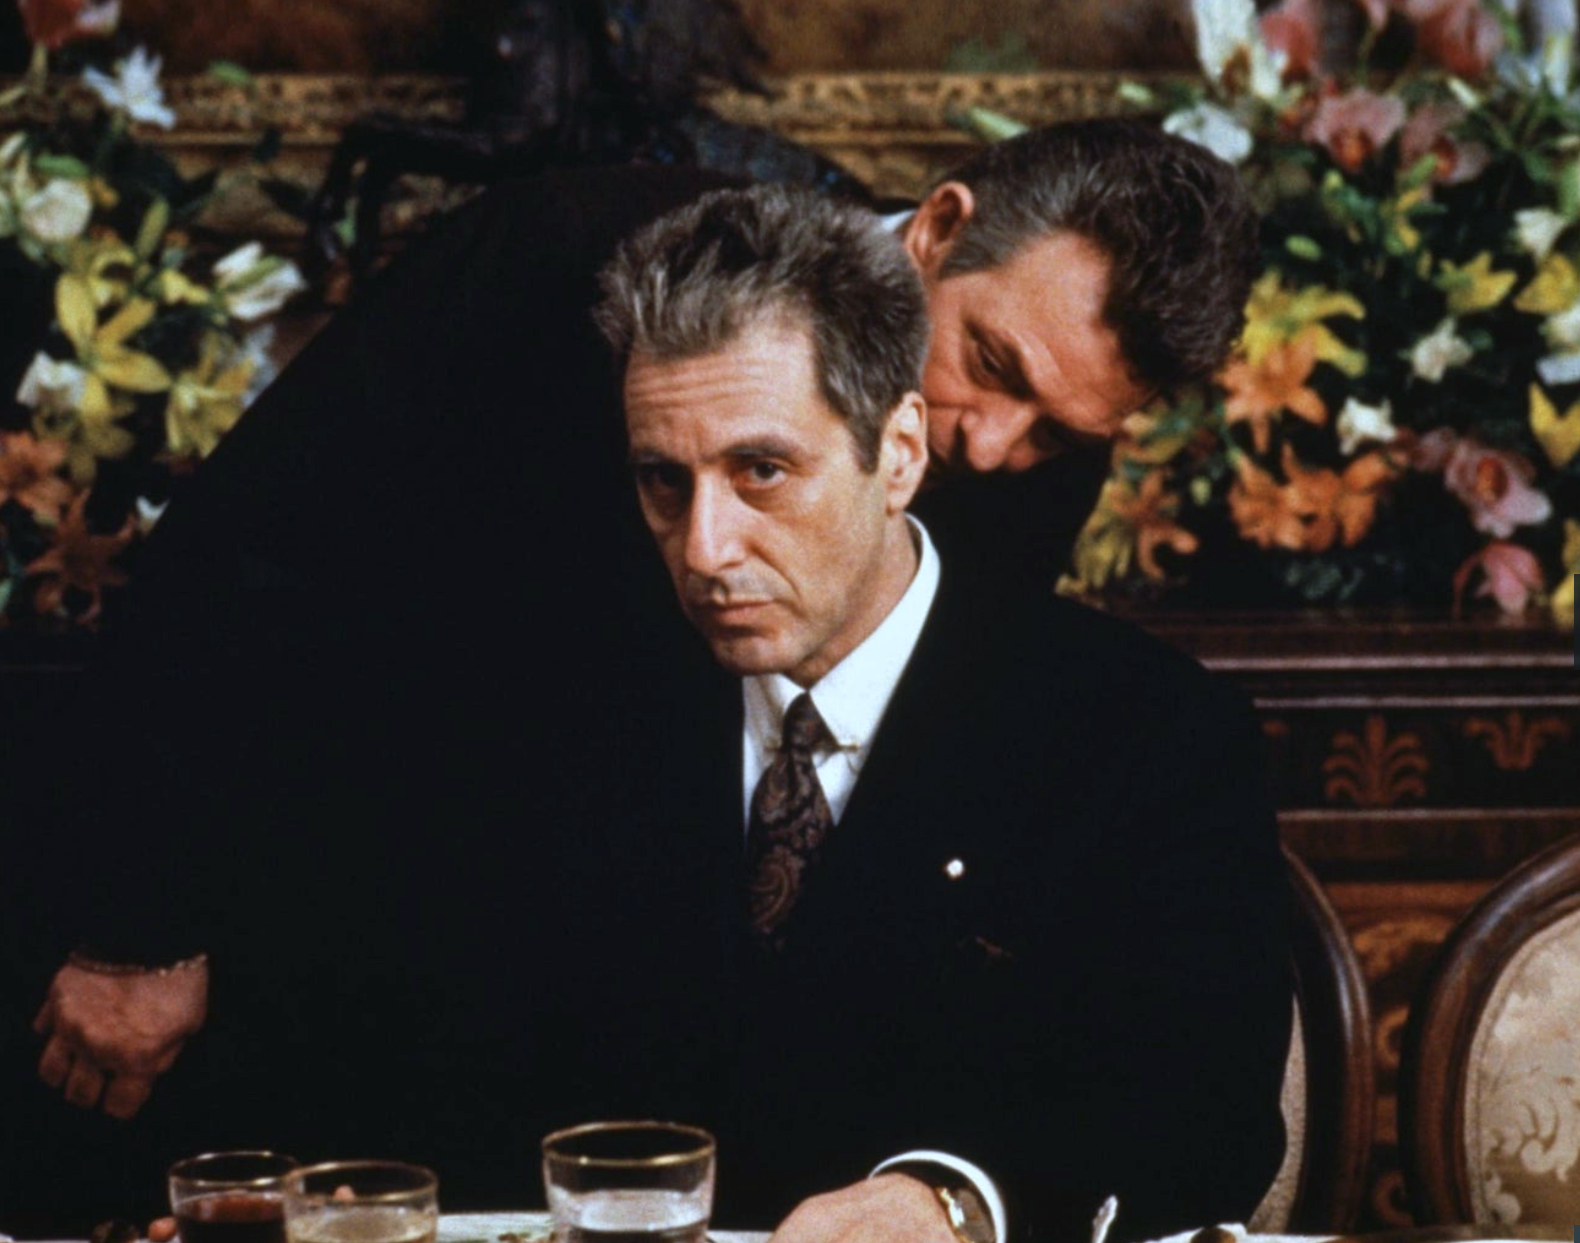 The Godfather Coda: The Death of Michael Corleone movie review